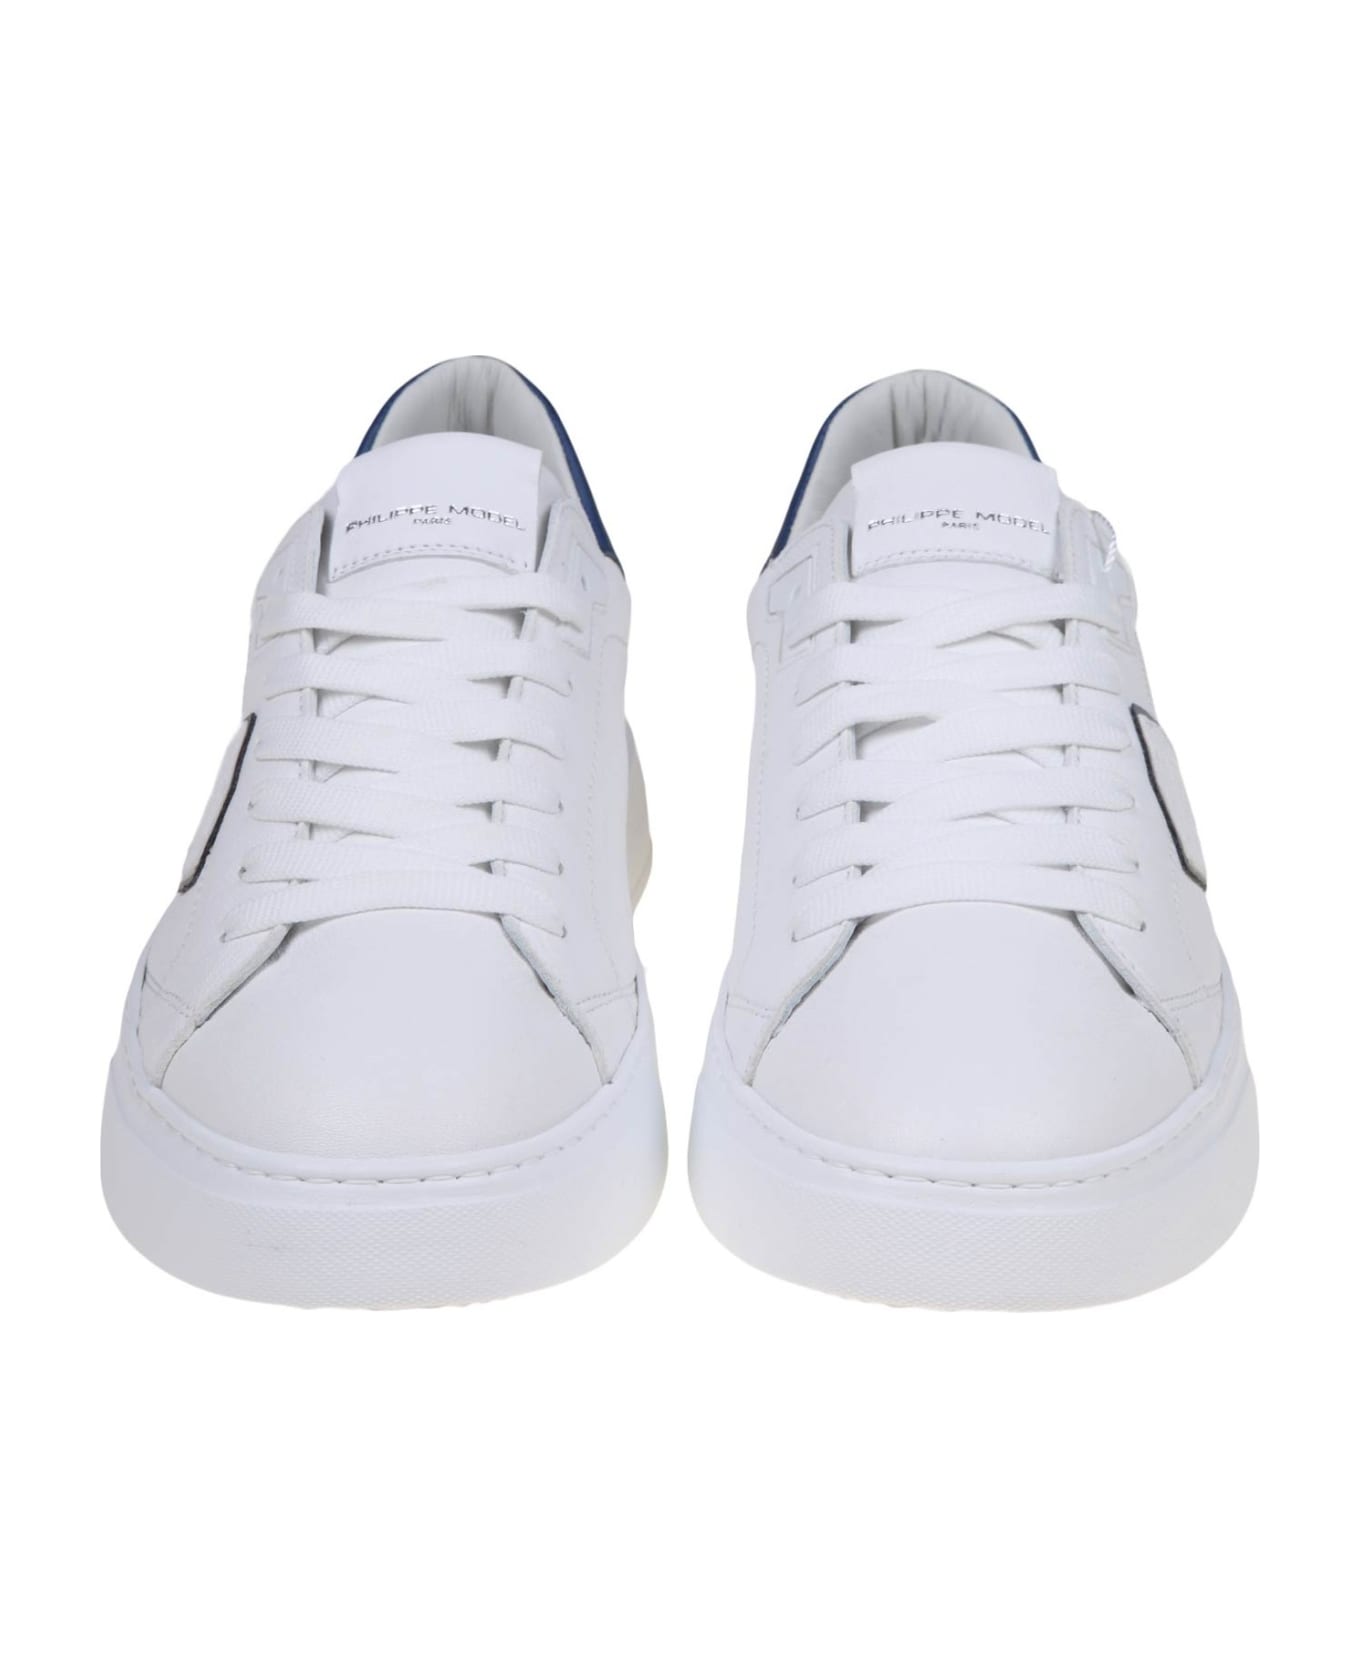 Philippe Model Temple Sneakers In White/blue Leather Philippe Model - WHITE